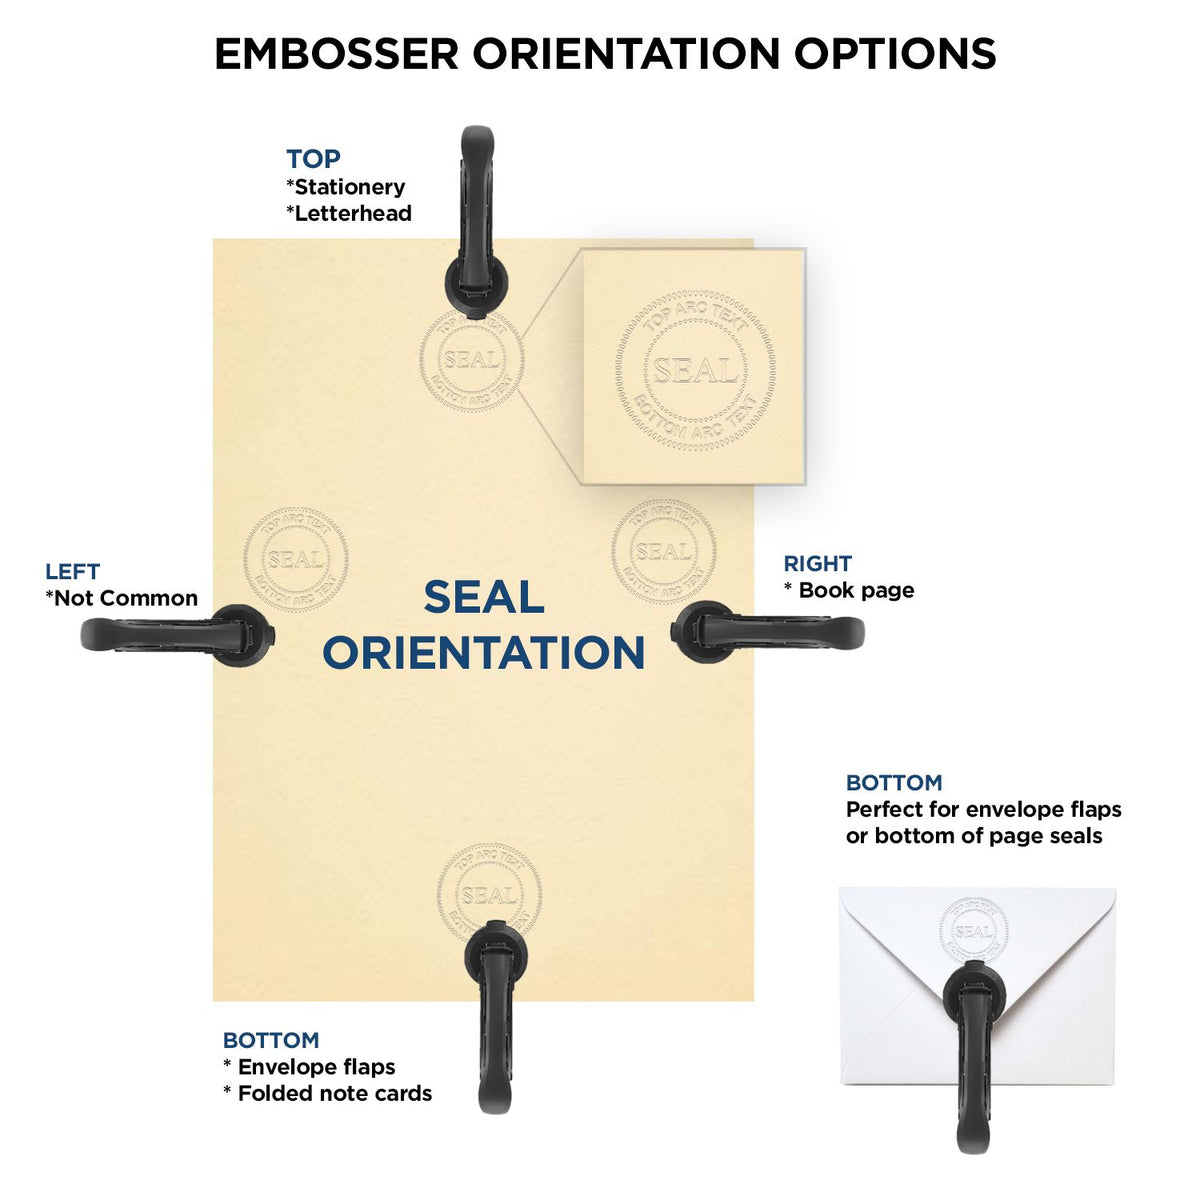 An infographic for the Handheld Georgia Land Surveyor Seal showing embosser orientation, this is showing examples of a top, bottom, right and left insert.